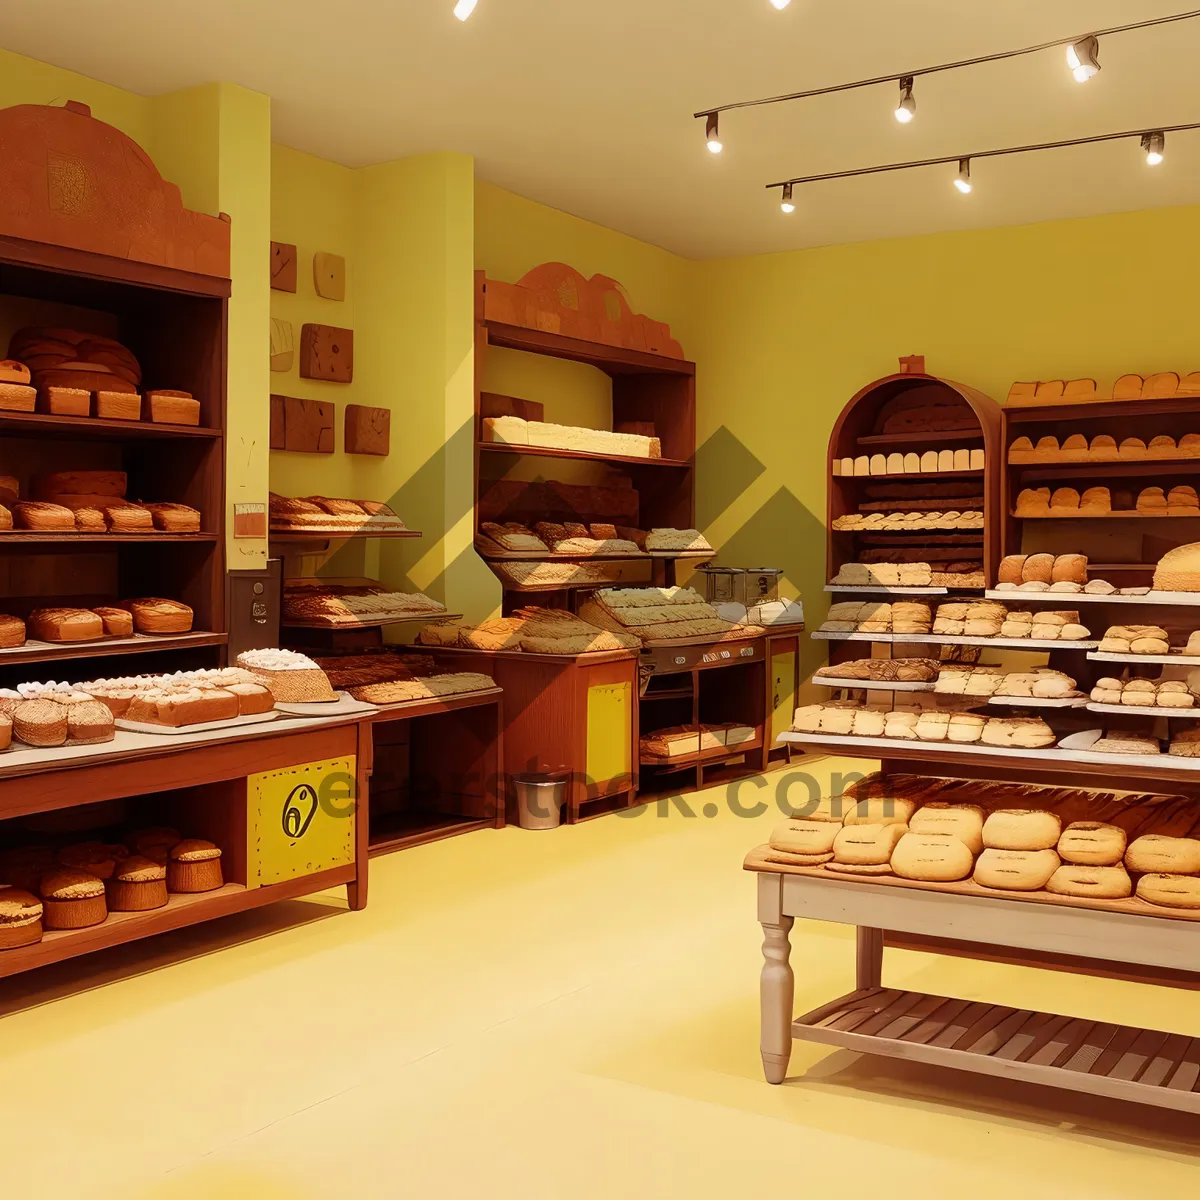 Picture of Modern Bakery Interior with Wood Furniture and Design